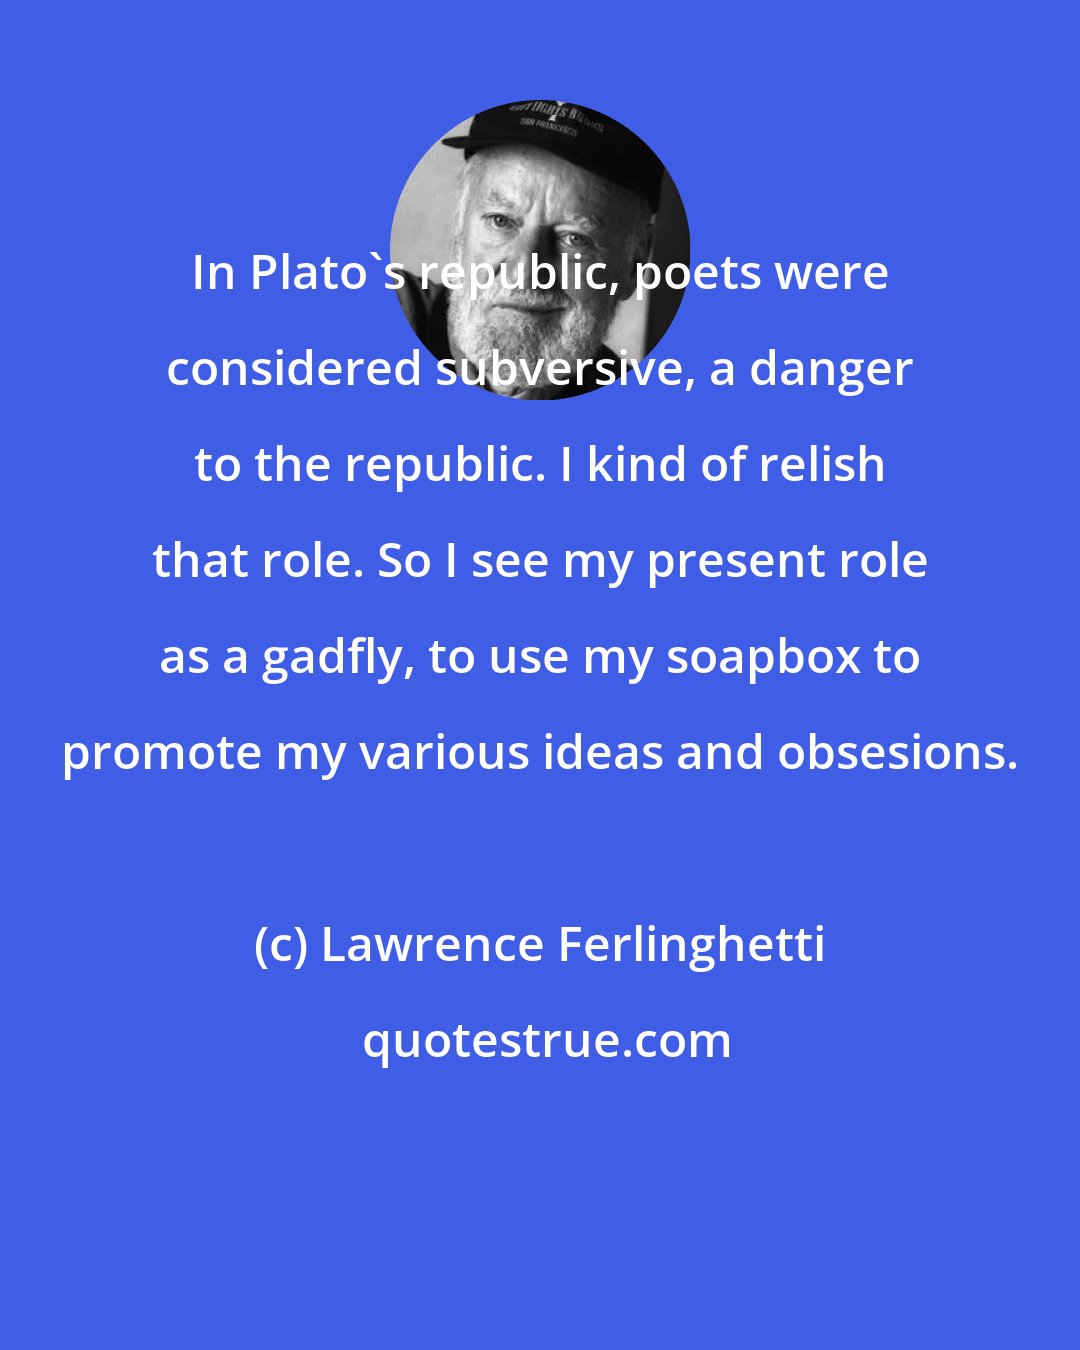 Lawrence Ferlinghetti: In Plato's republic, poets were considered subversive, a danger to the republic. I kind of relish that role. So I see my present role as a gadfly, to use my soapbox to promote my various ideas and obsesions.